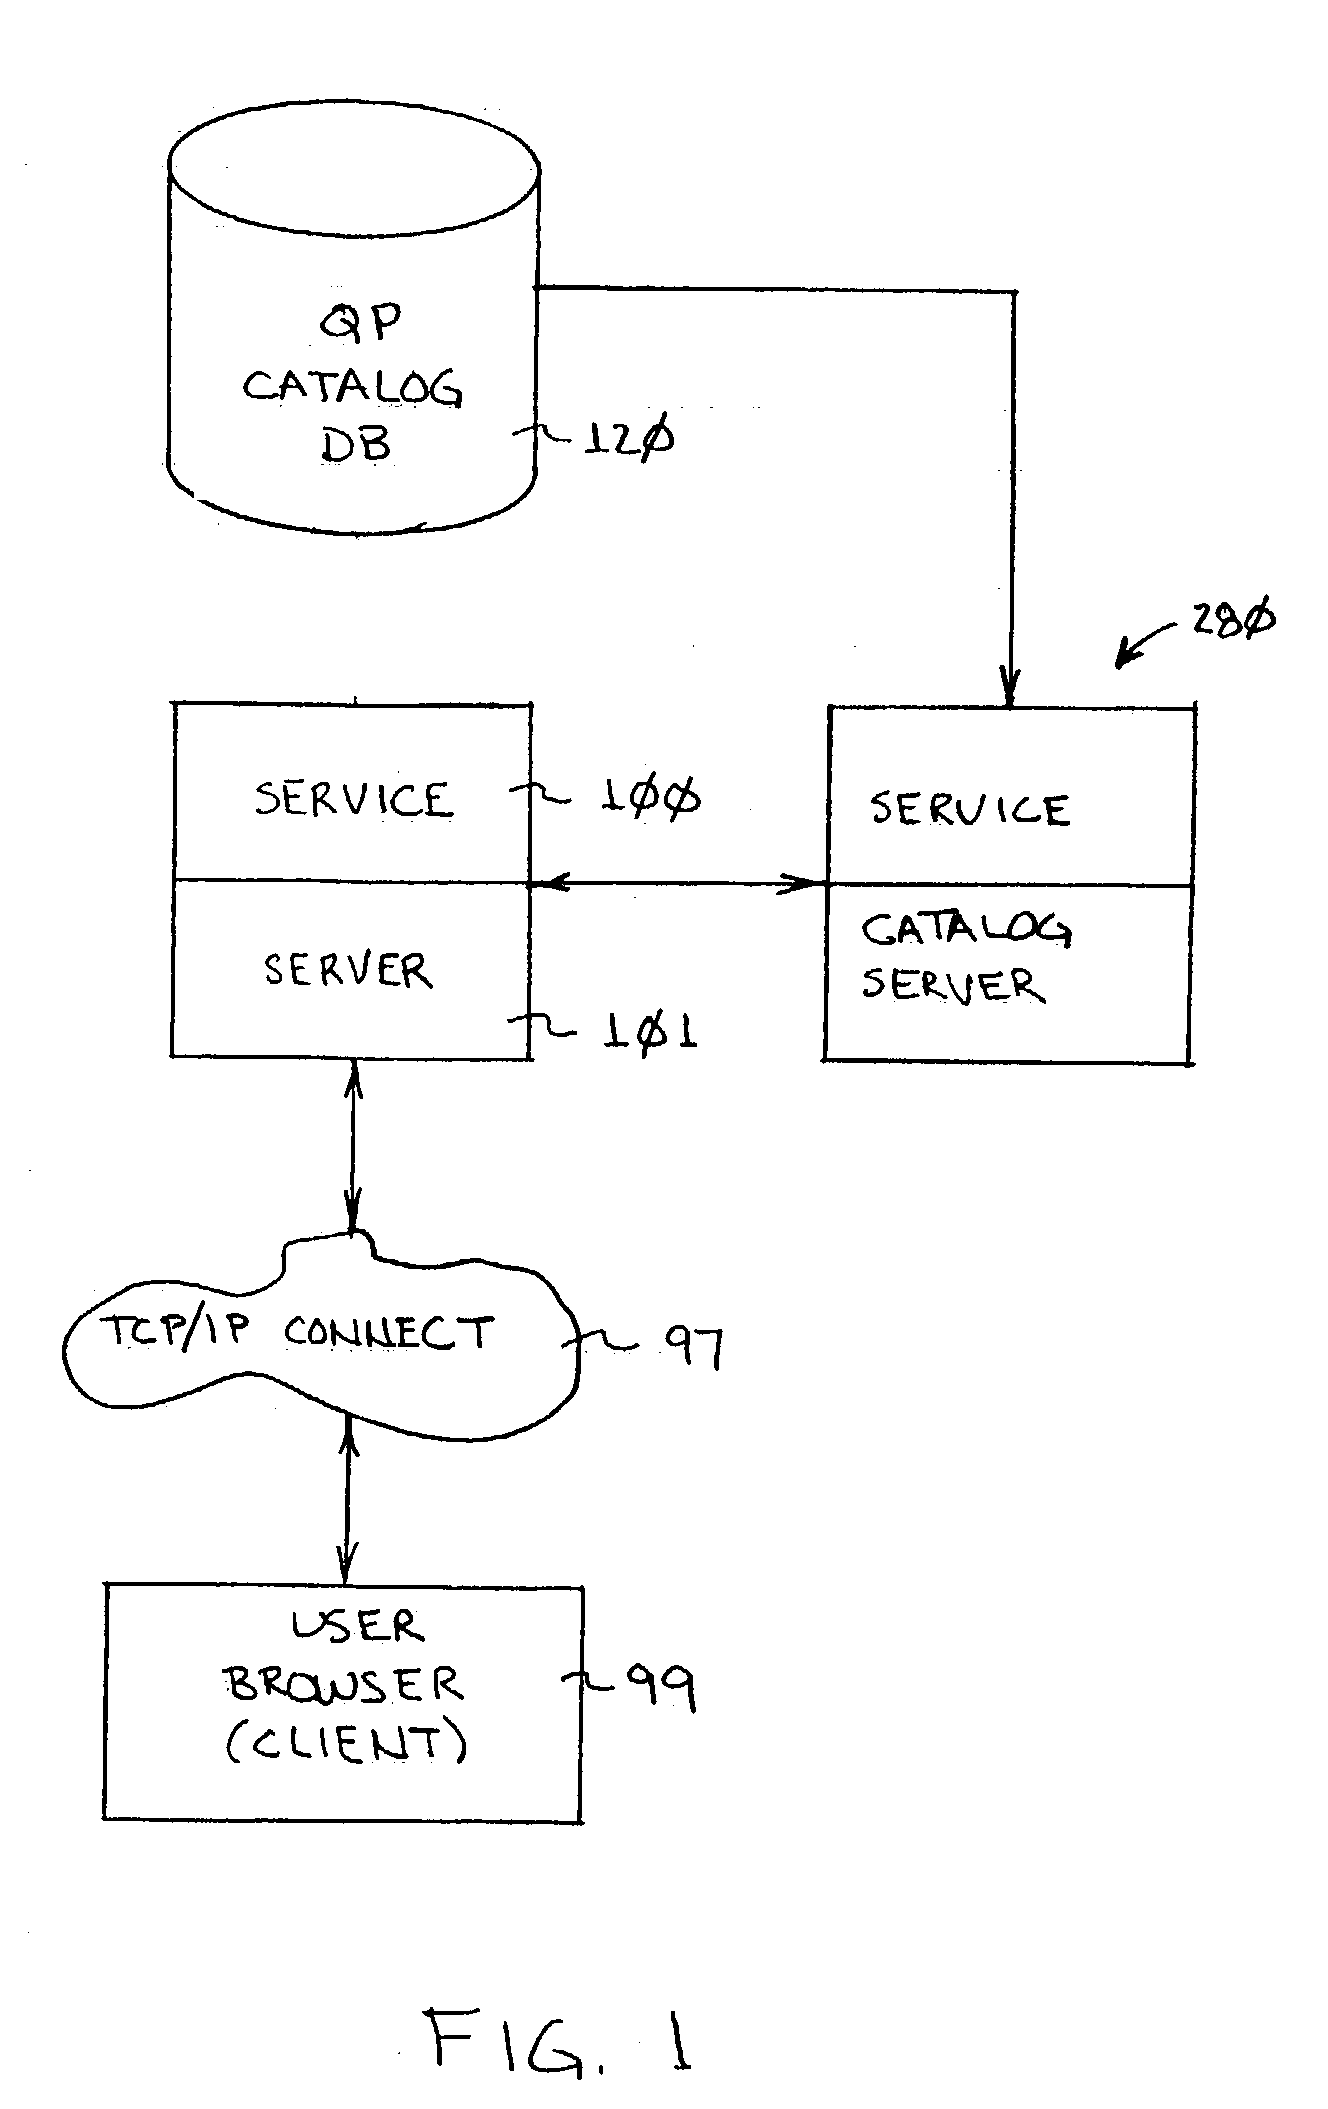 System and method for aggregating user project information in a multi-server system